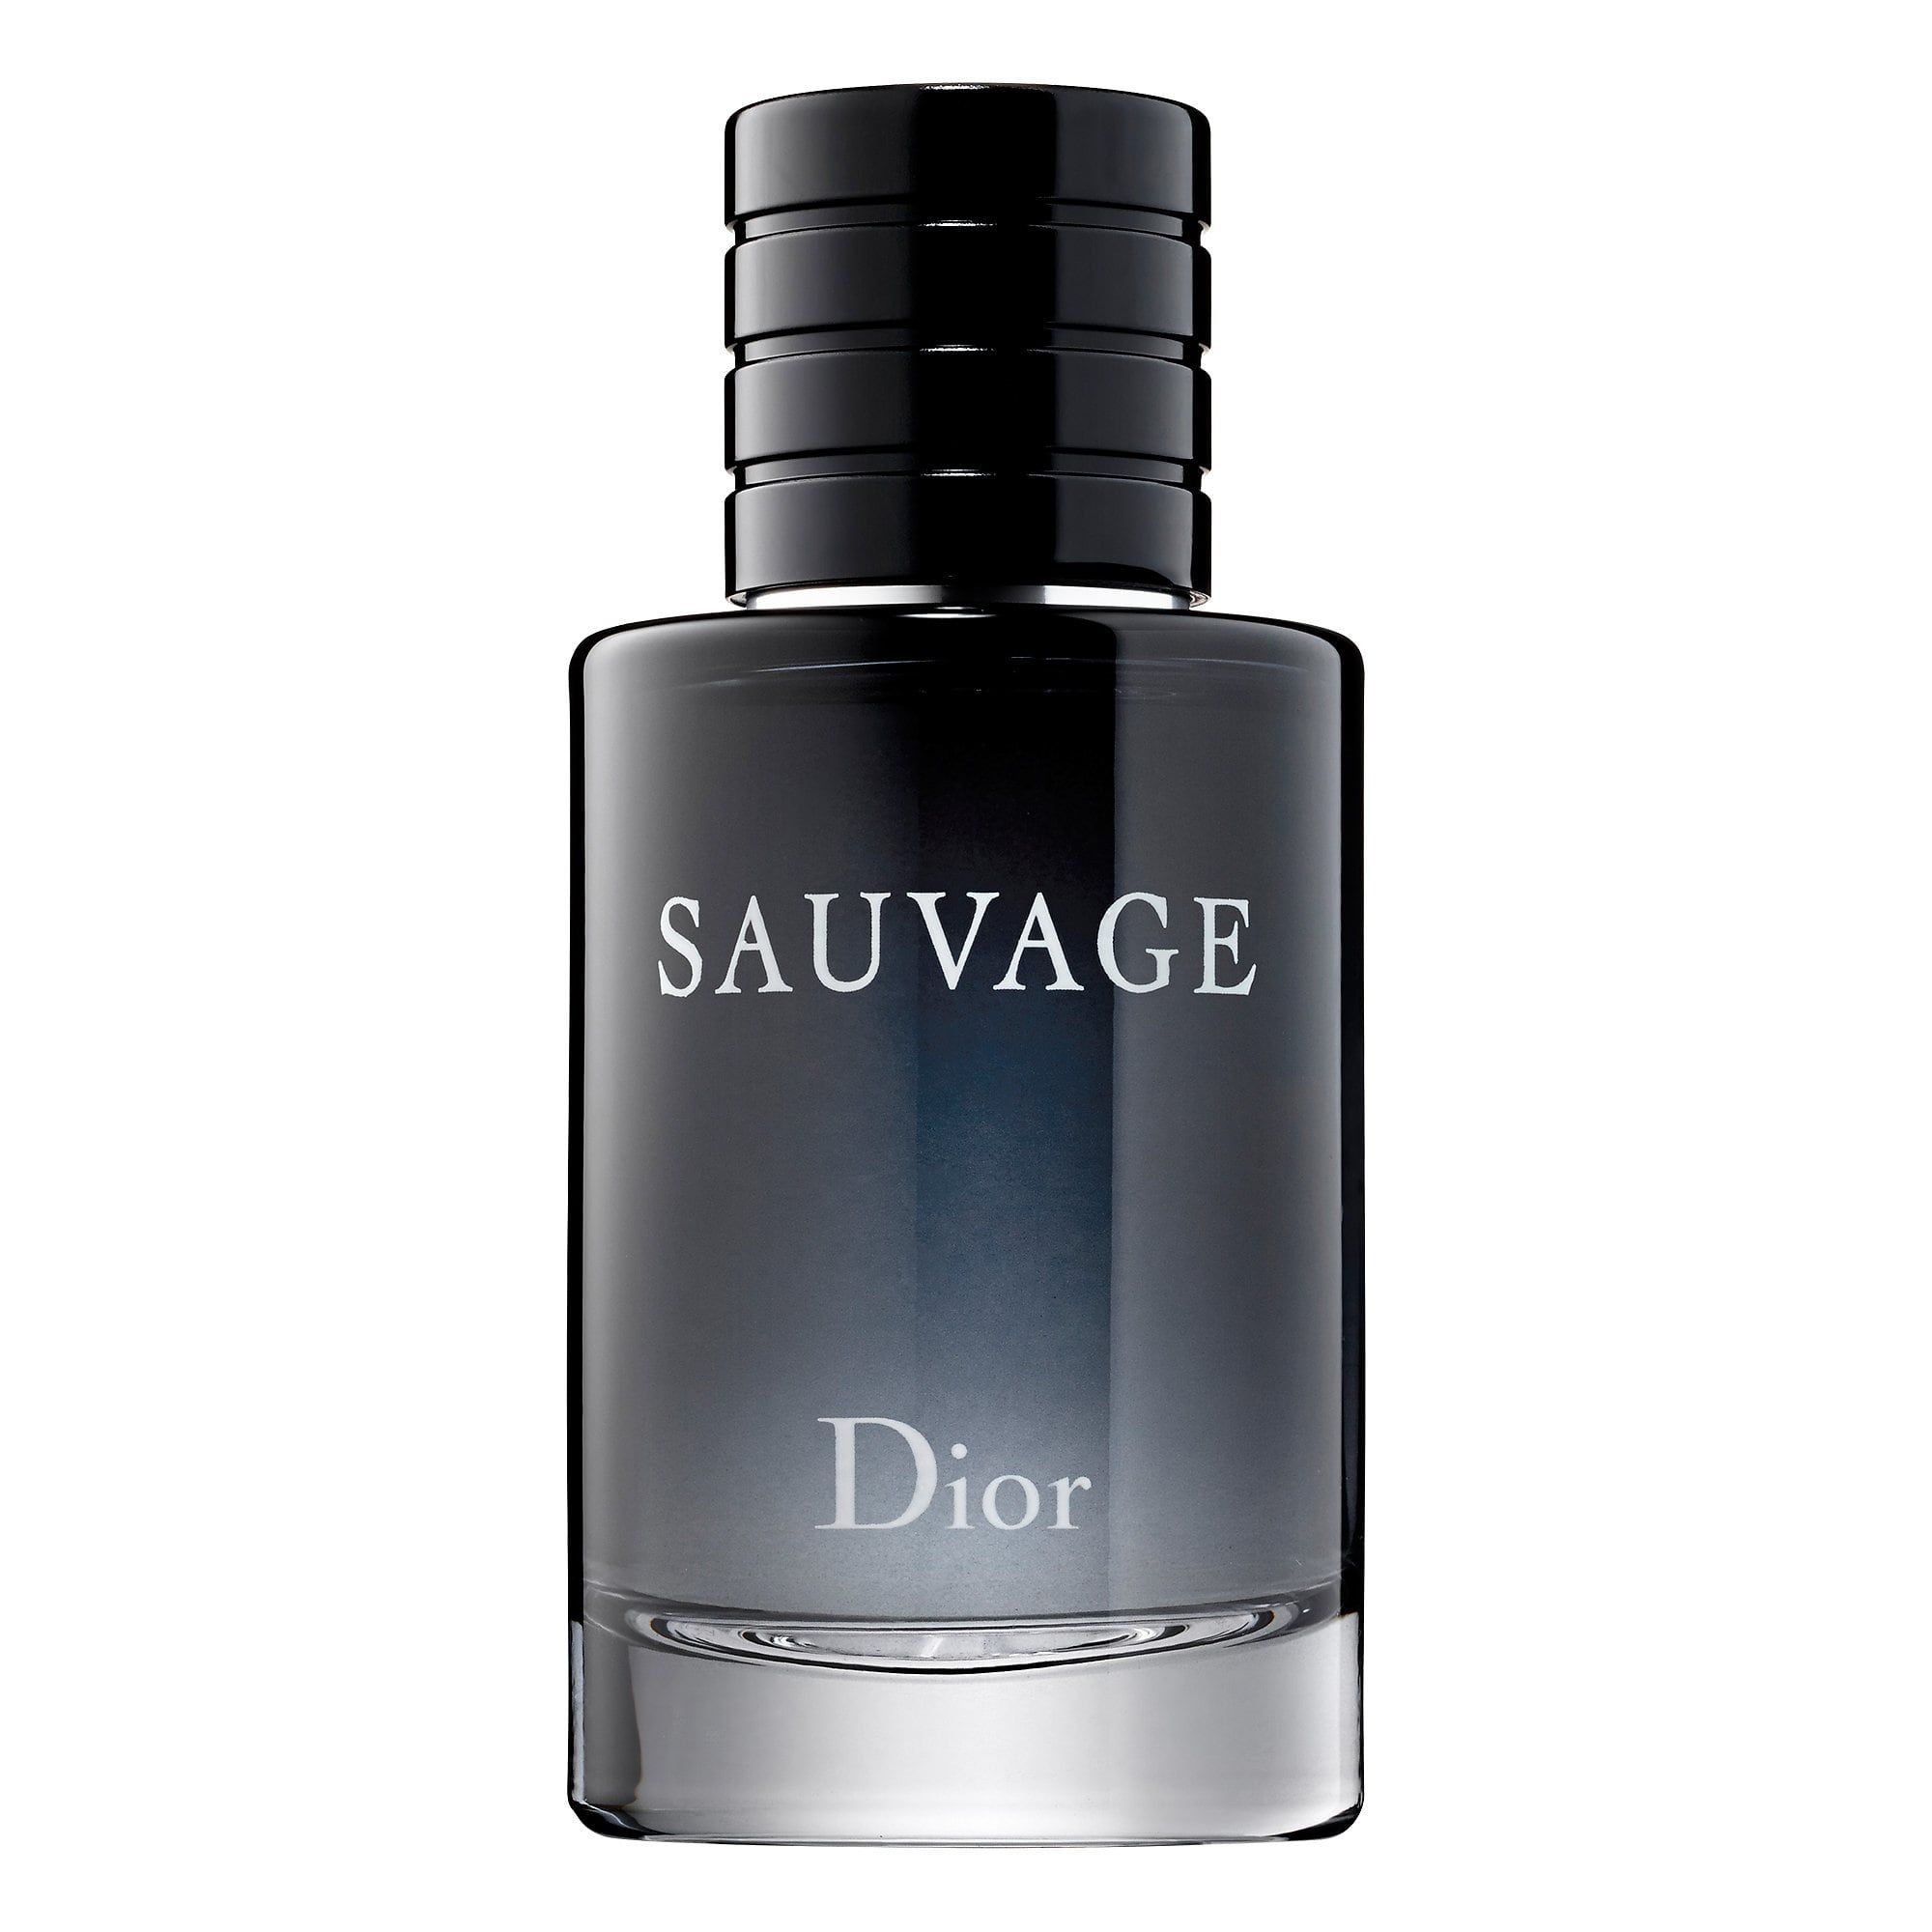 Women's Favorite Men's Cologne, According to Research